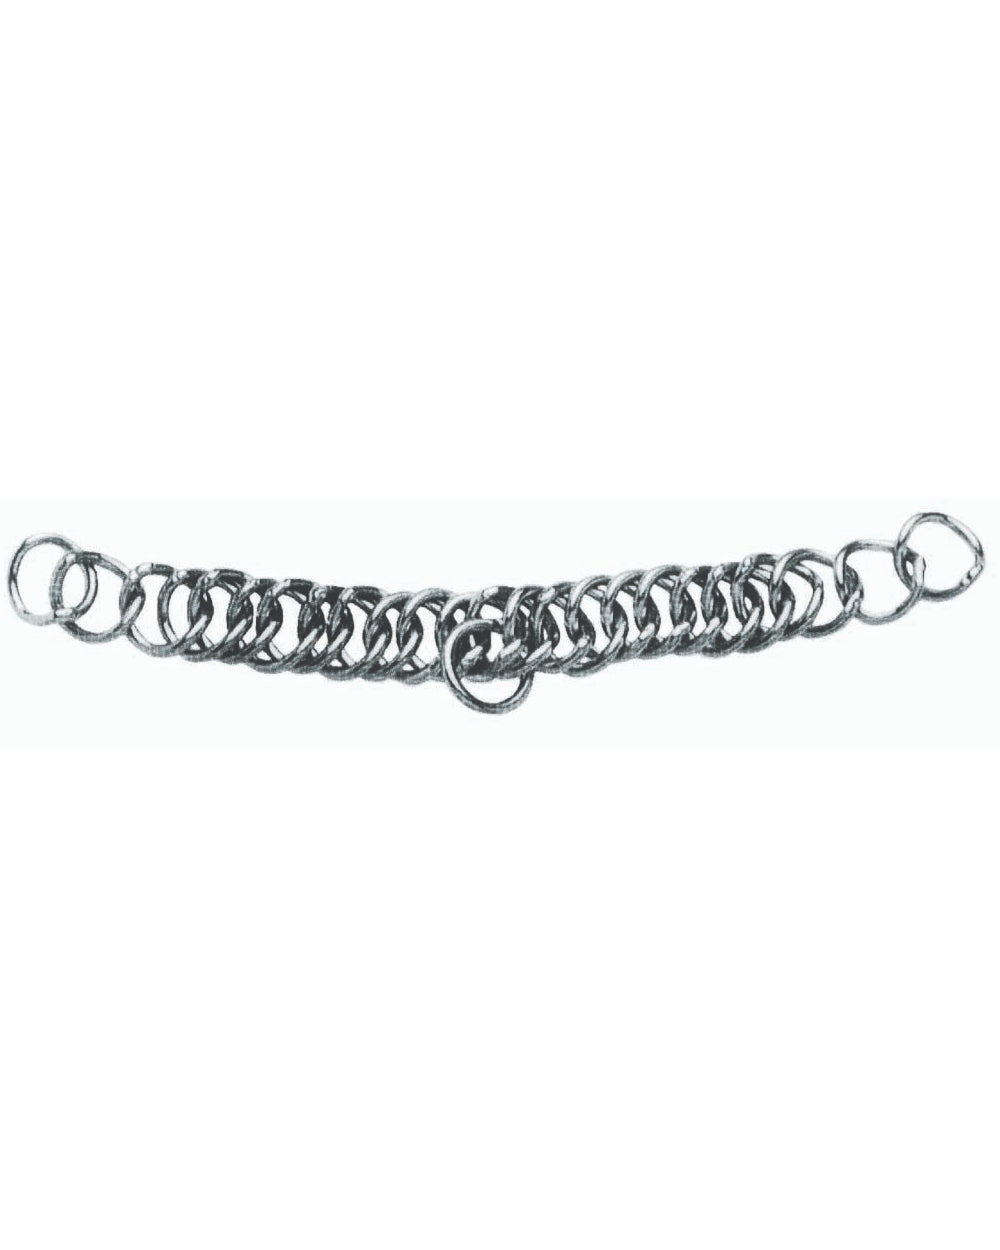 Korsteel Twin Link Curb Chain on white background